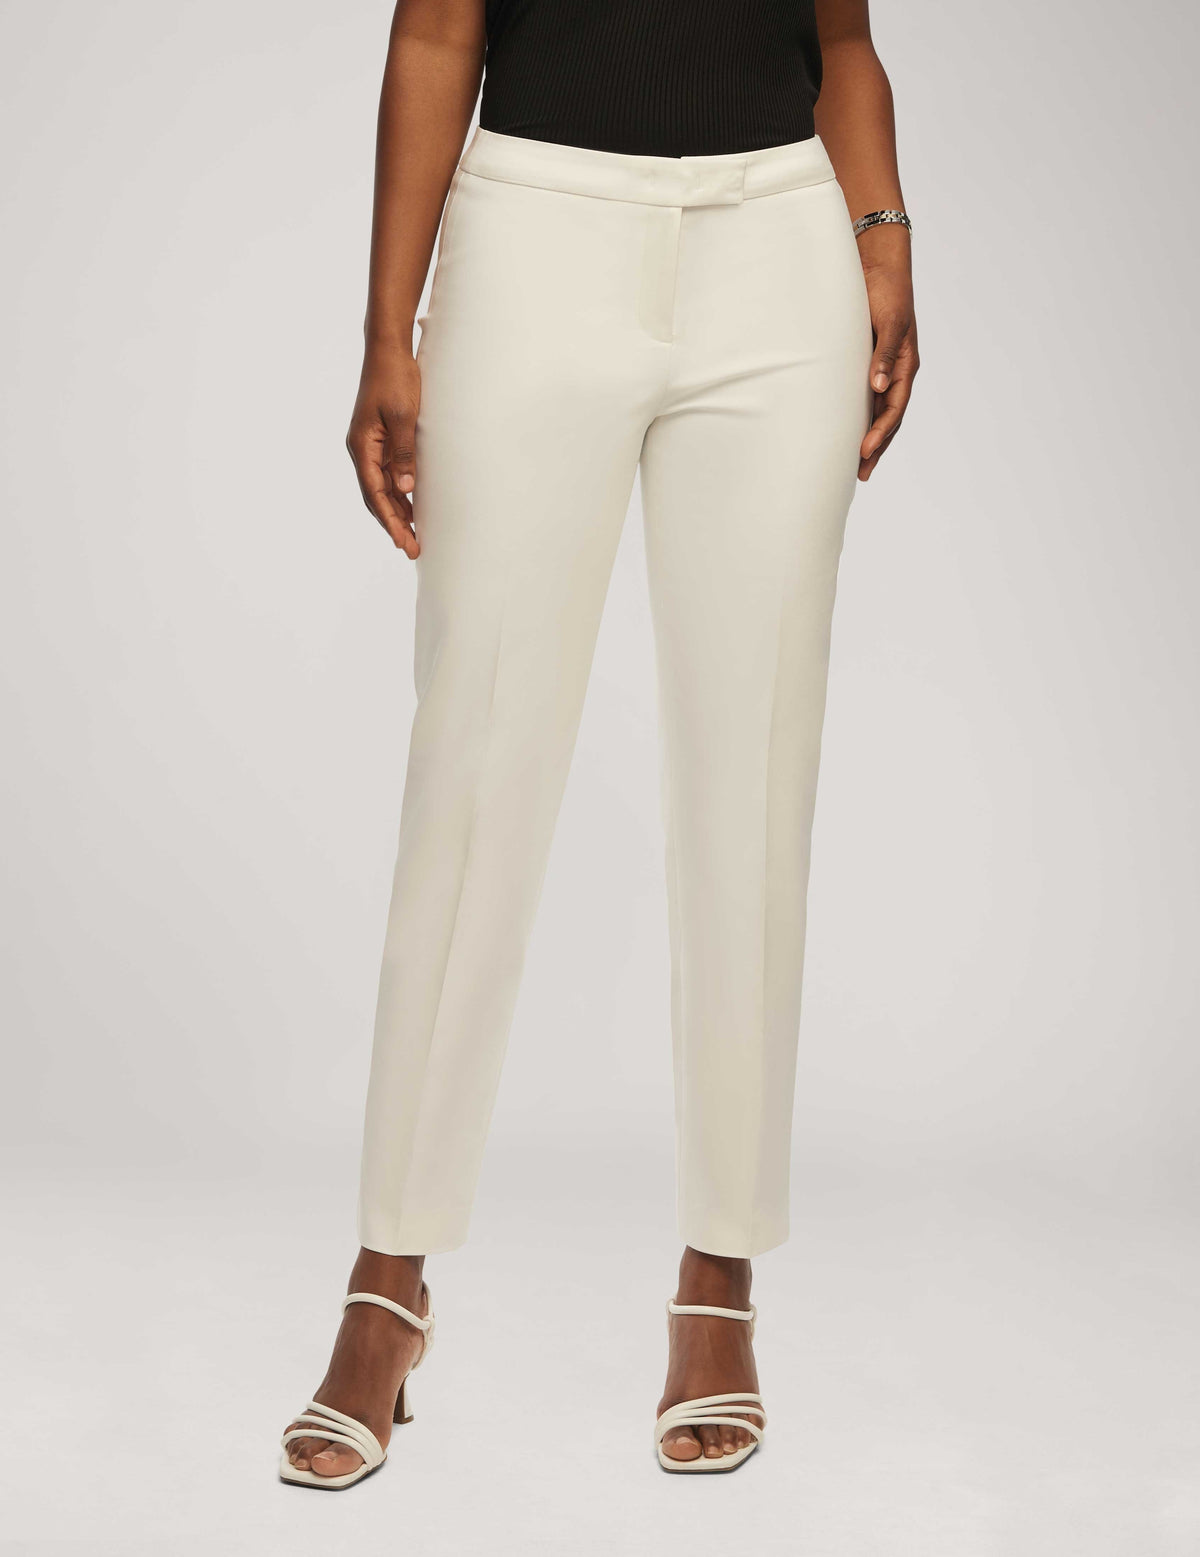 Anne Klein Bright White Cotton Double Weave Bowie Pant- Clearance